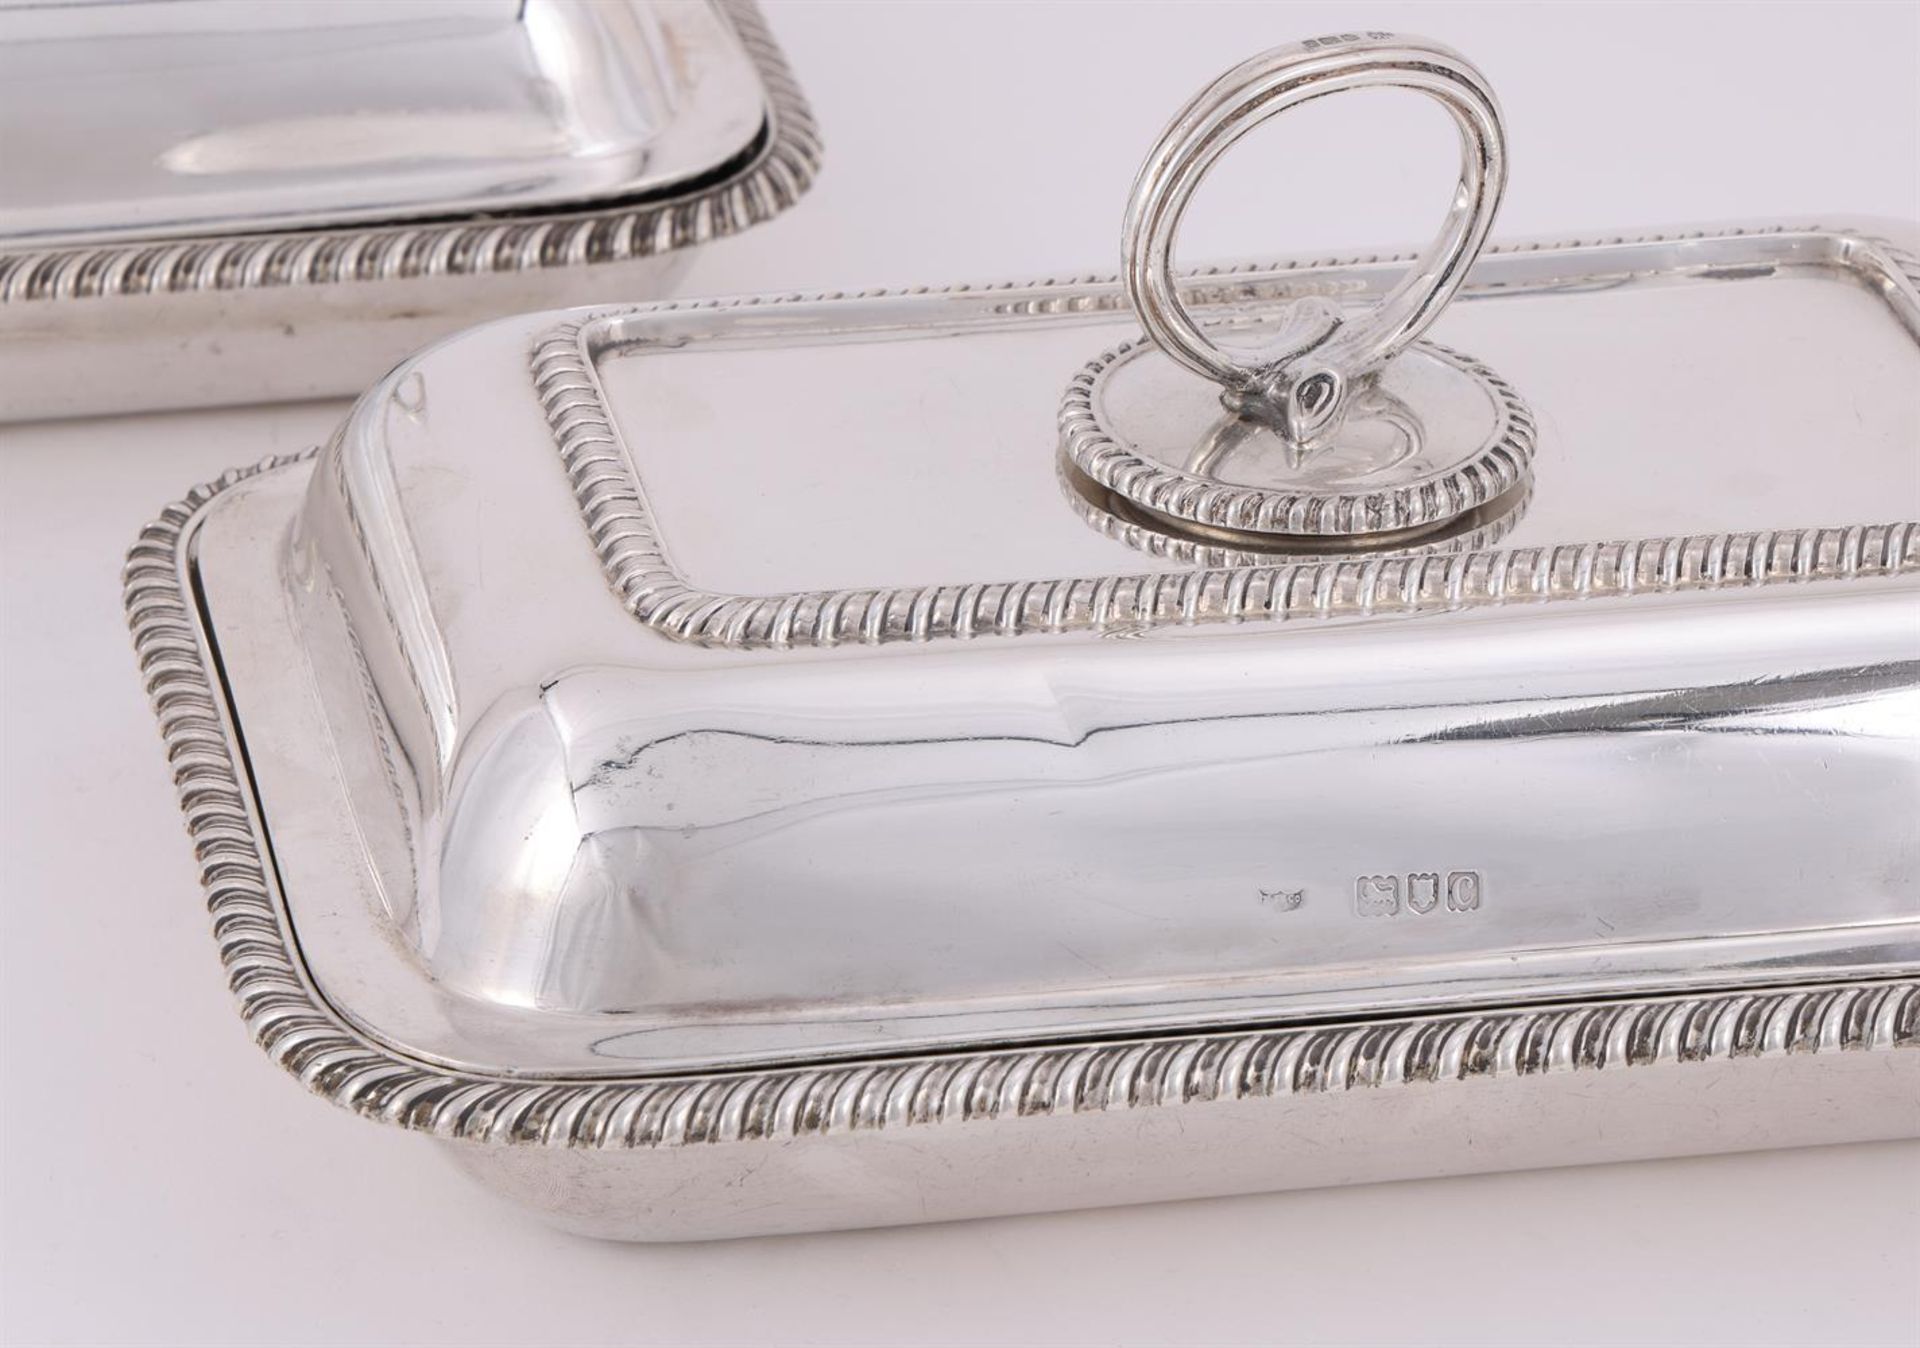 A PAIR OF LATE VICTORIAN SILVER ENTREE DISHES AND COVERS WITH MATCHED HANDLES - Image 2 of 2